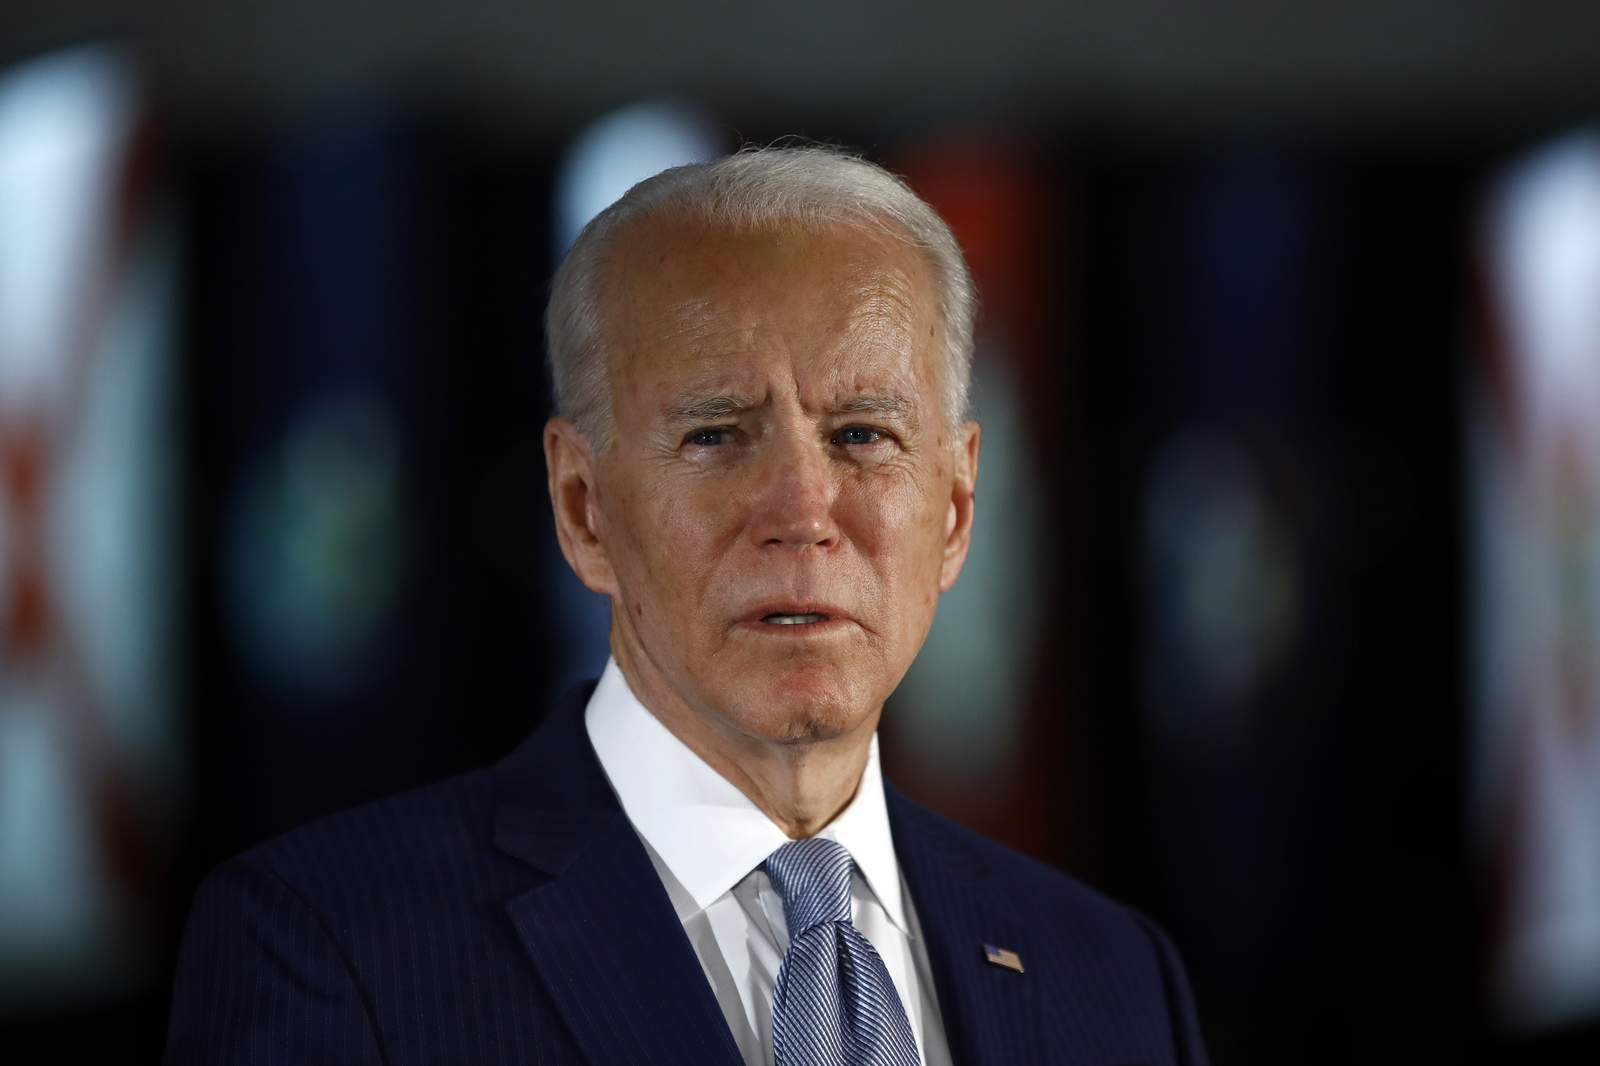 Civil unrest could influence Bidens search for running mate